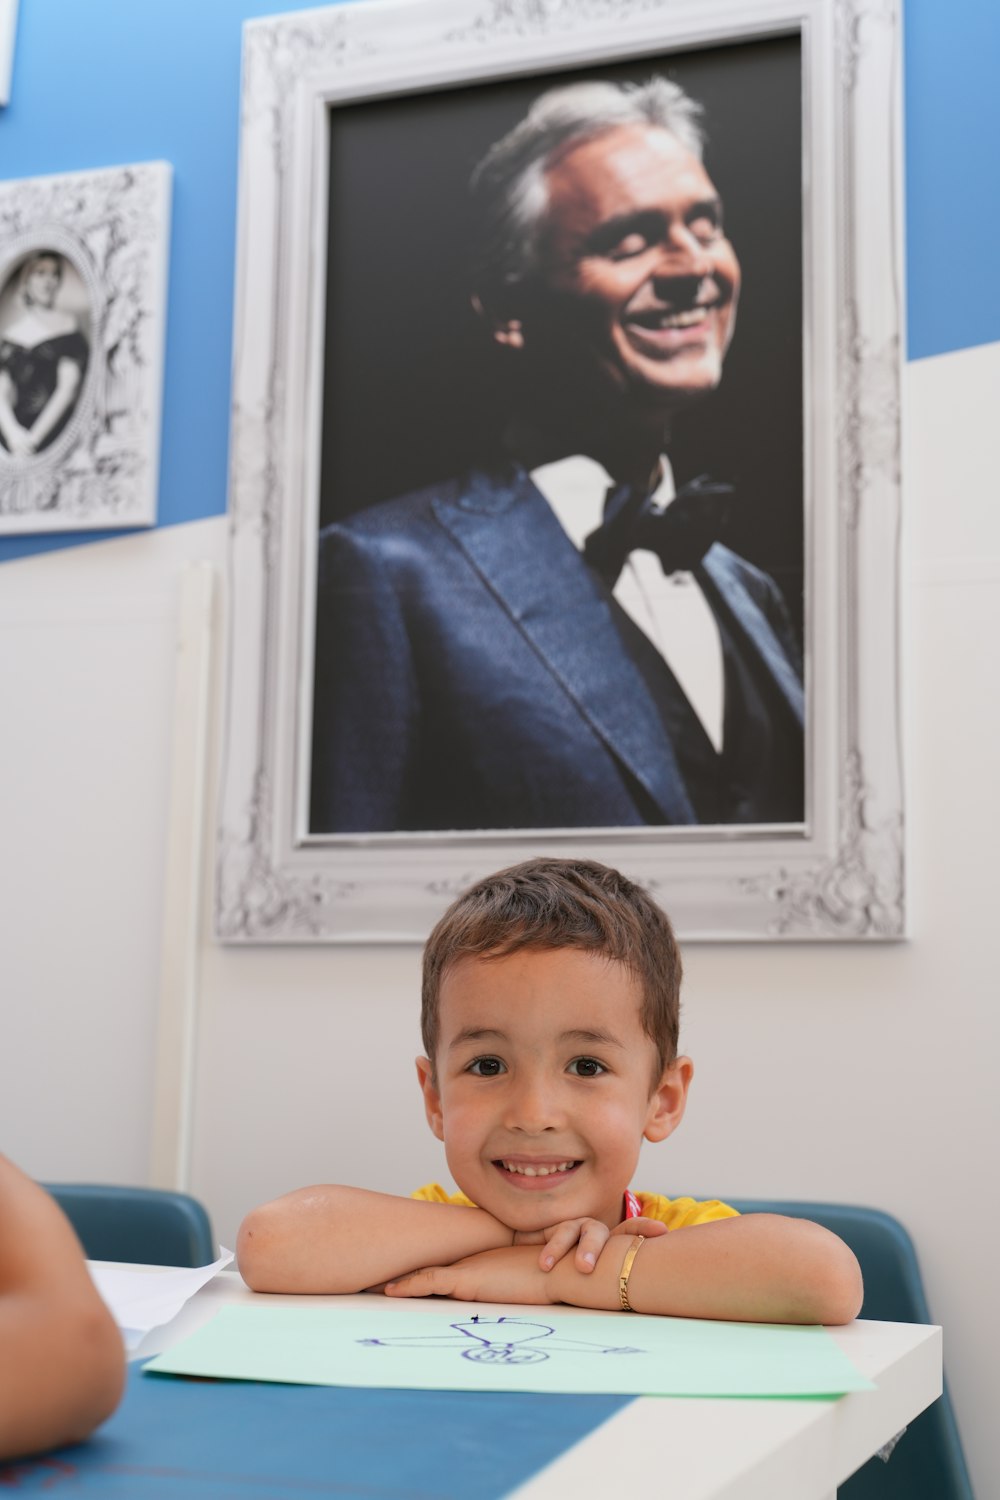 a young boy sitting at a table in front of a picture of a man